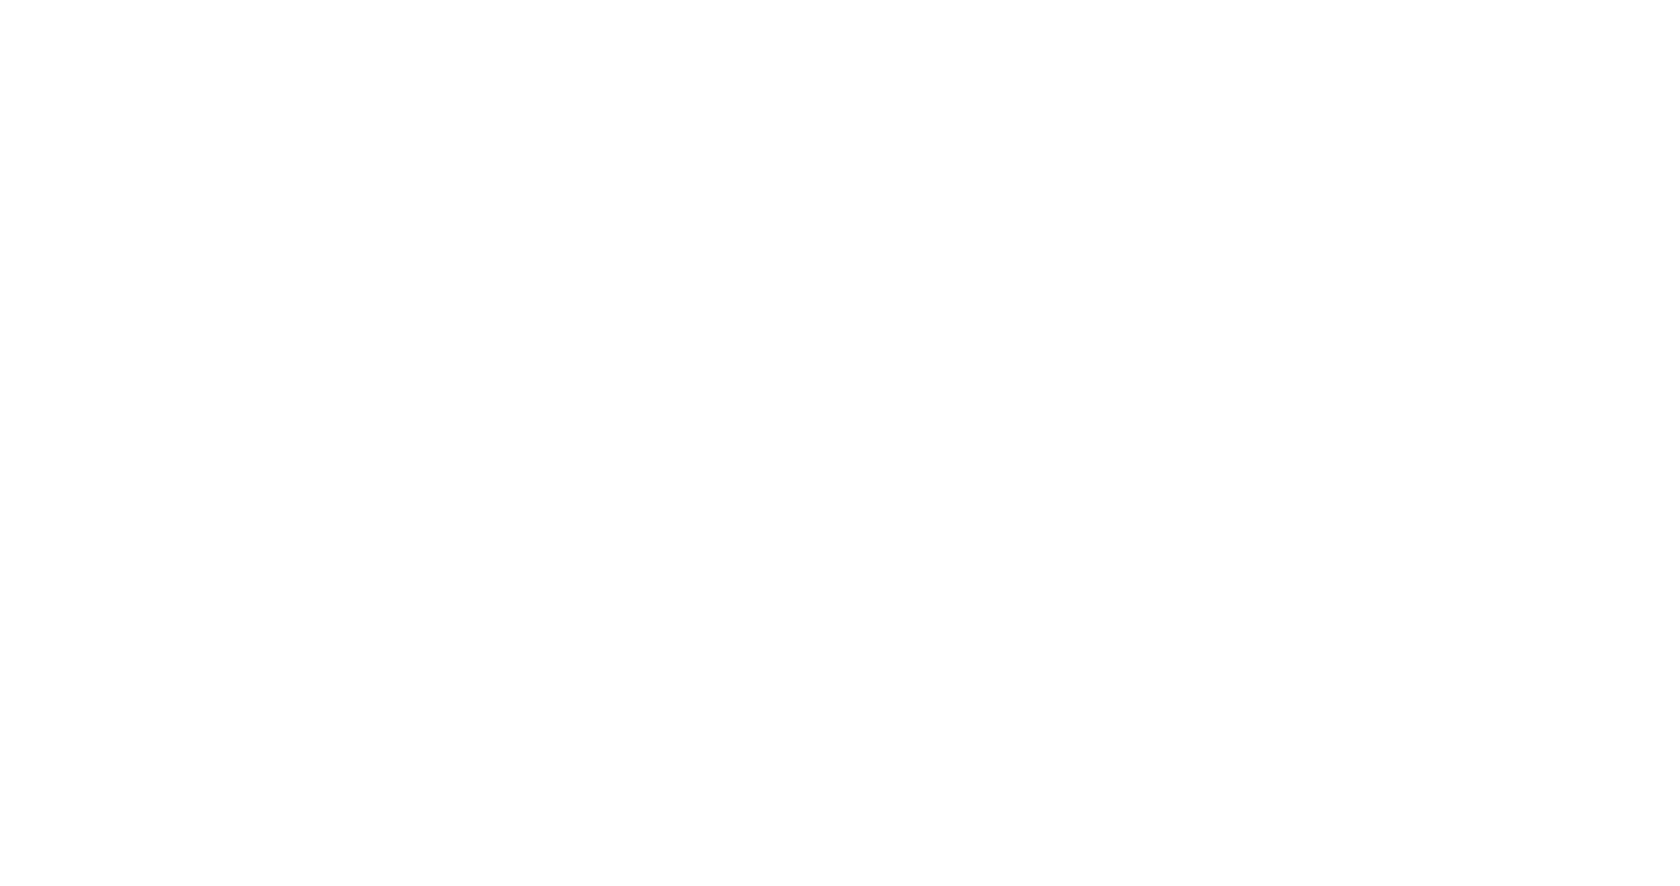 Fight your way back home through the collapsed empire